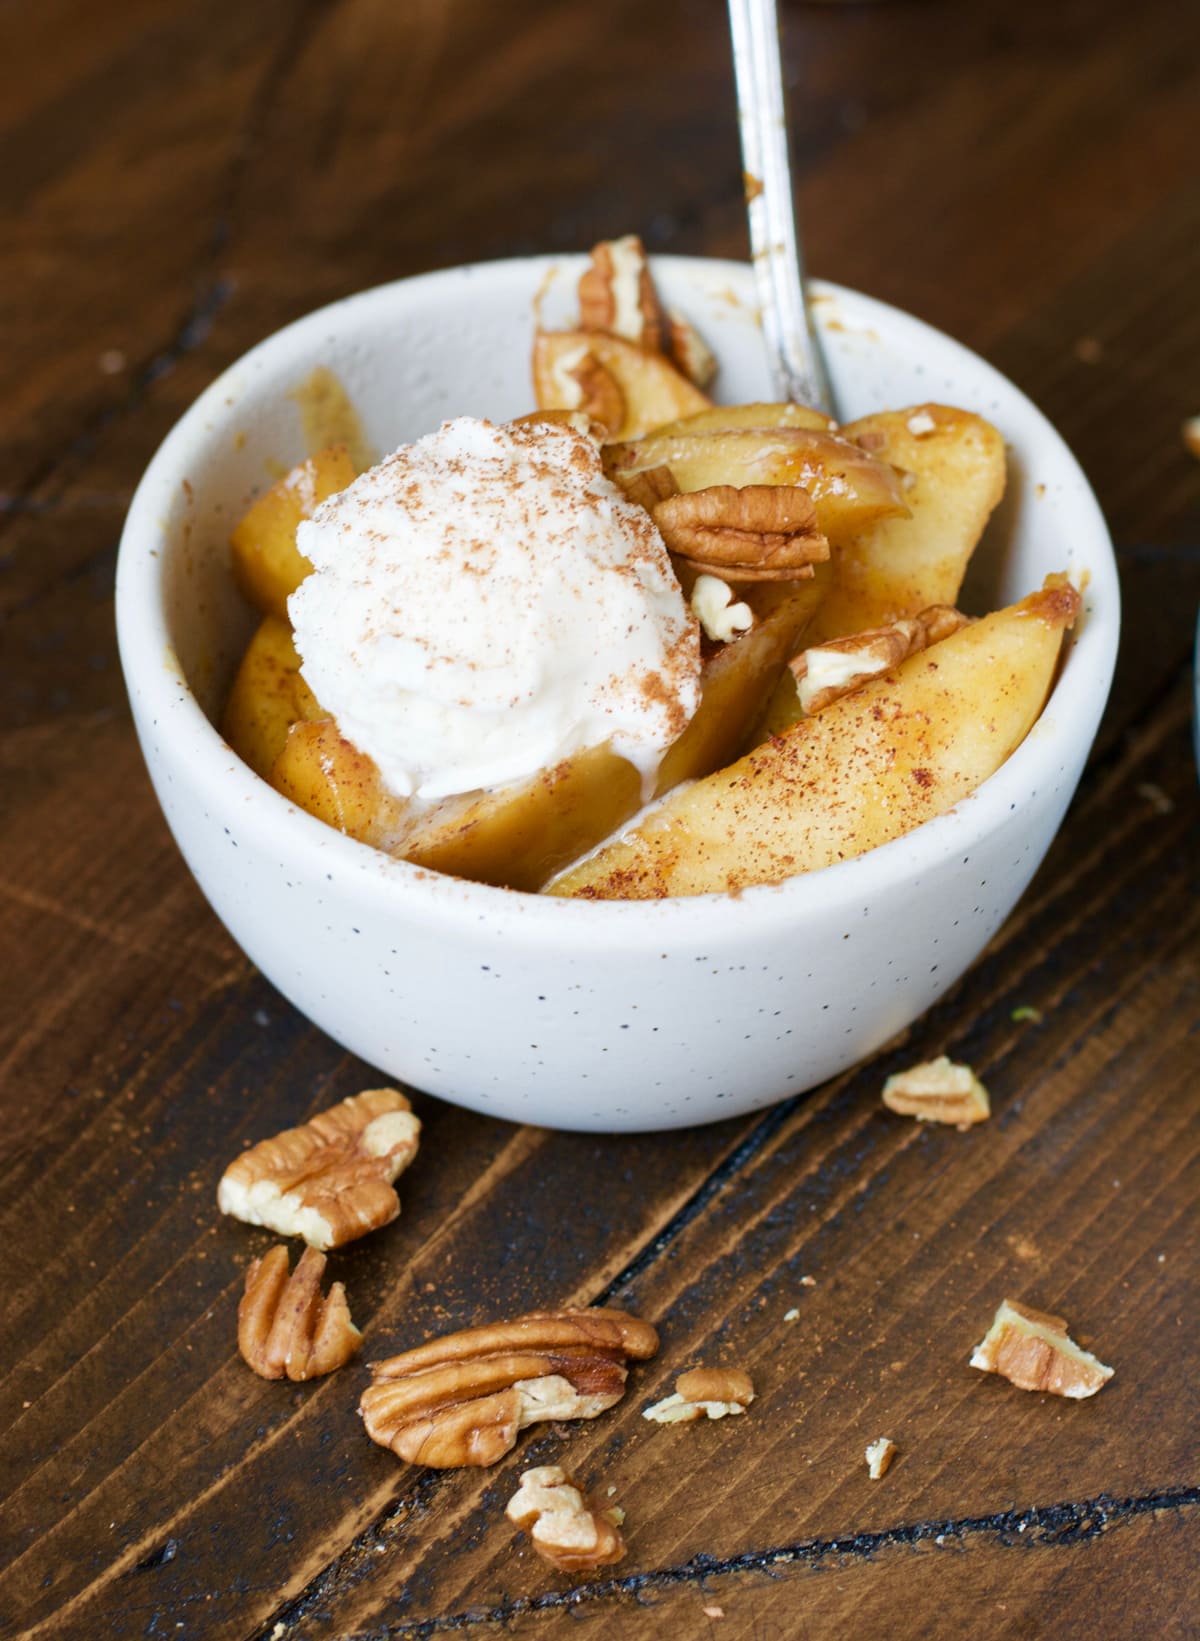 These Slow Cooker Pumpkin Spiced Apples are the ultimate autumn comfort food! You will love these tender apples packed with pumpkin spice and cinnamon flavor!